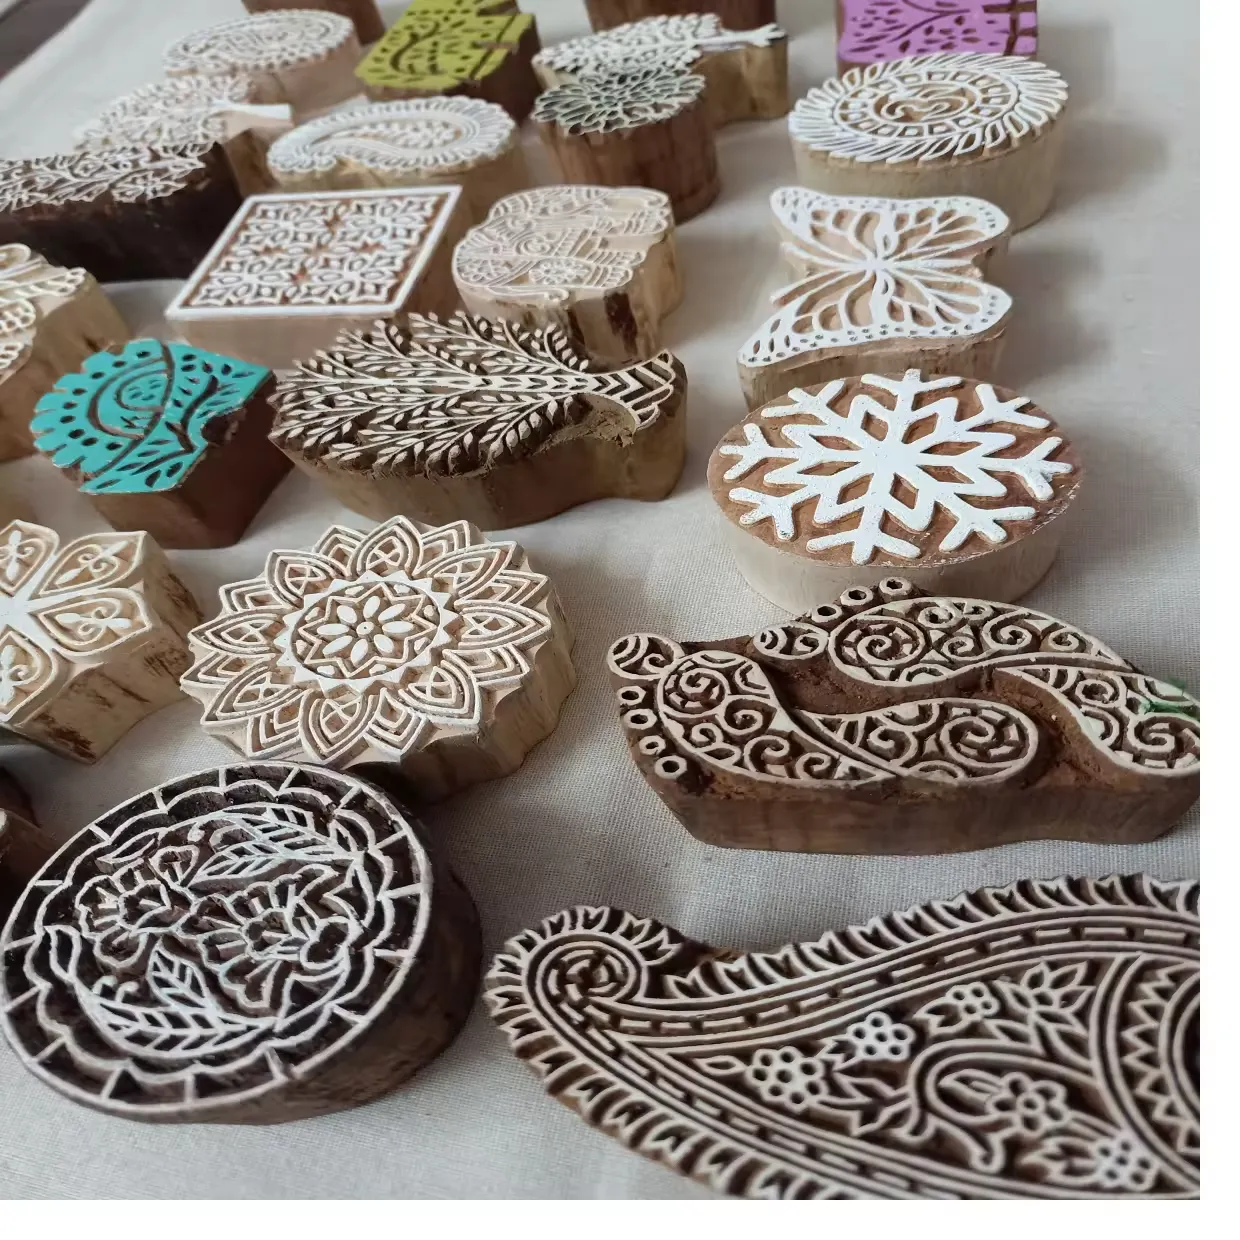 Custom made wooden textile and henna mini printing blocks ideal for textile and garment printing suitable for henna artists